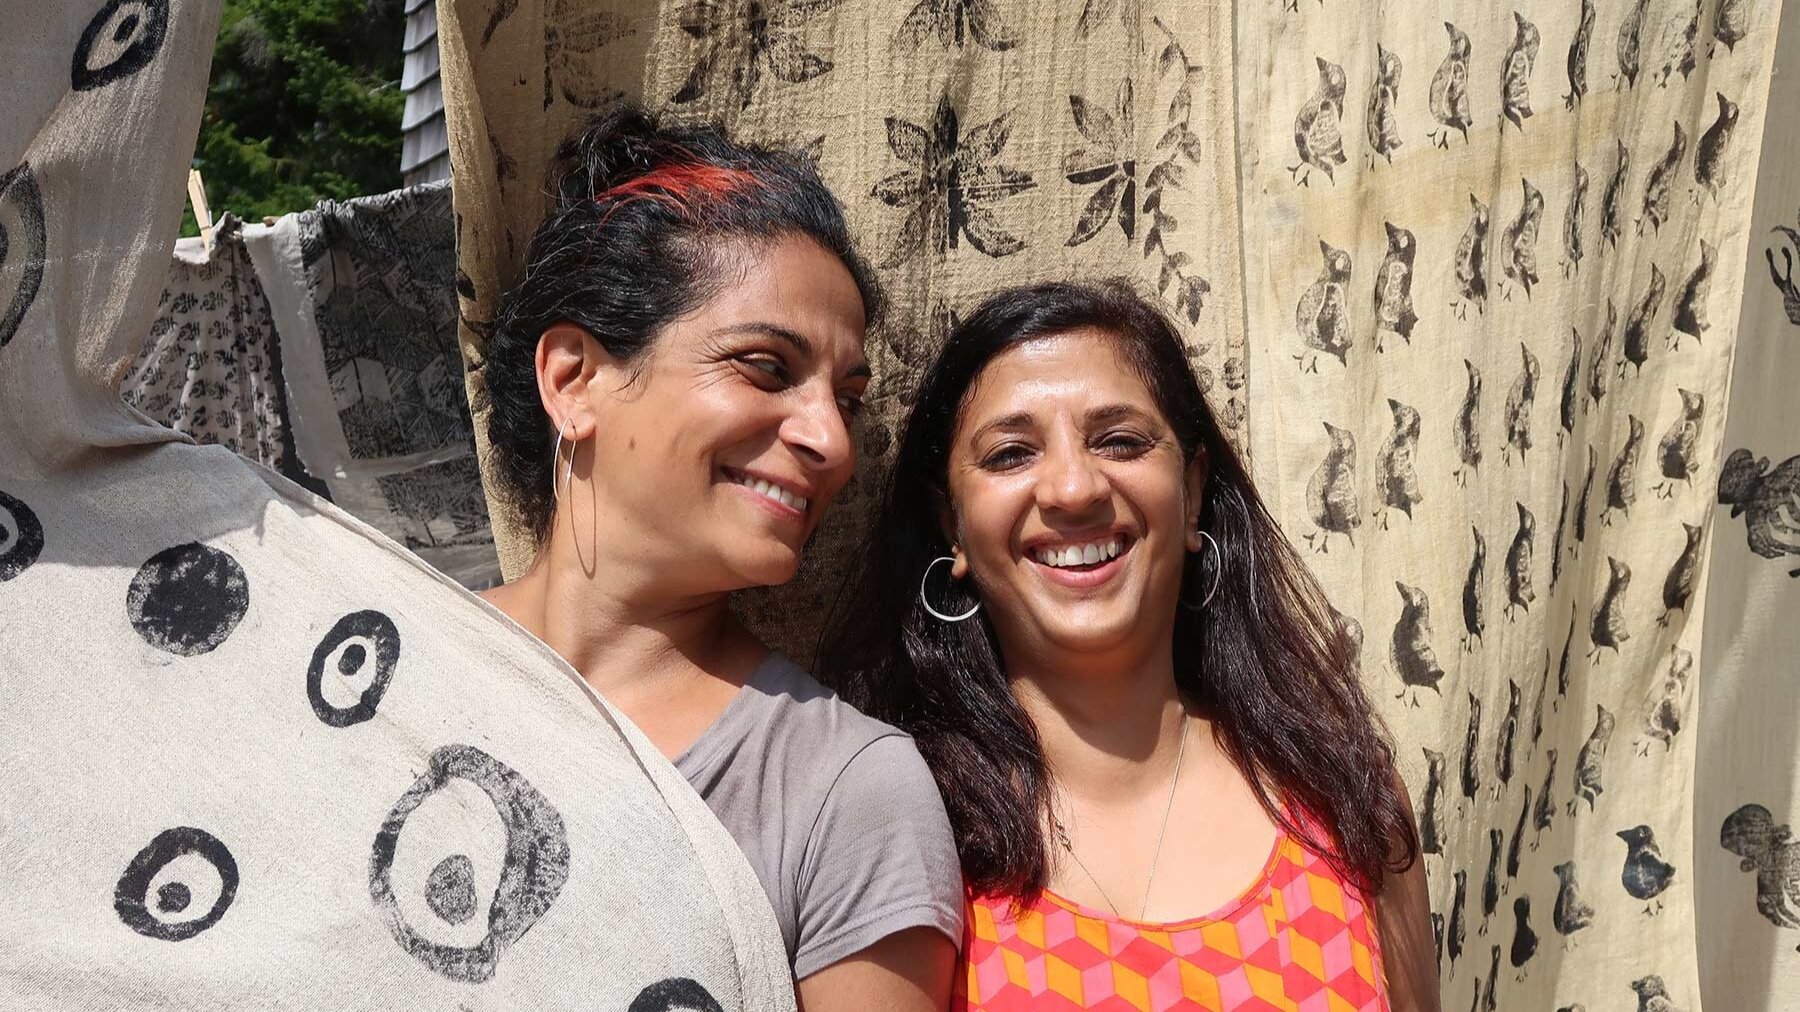 Two women smile in front of blockprinted textiles